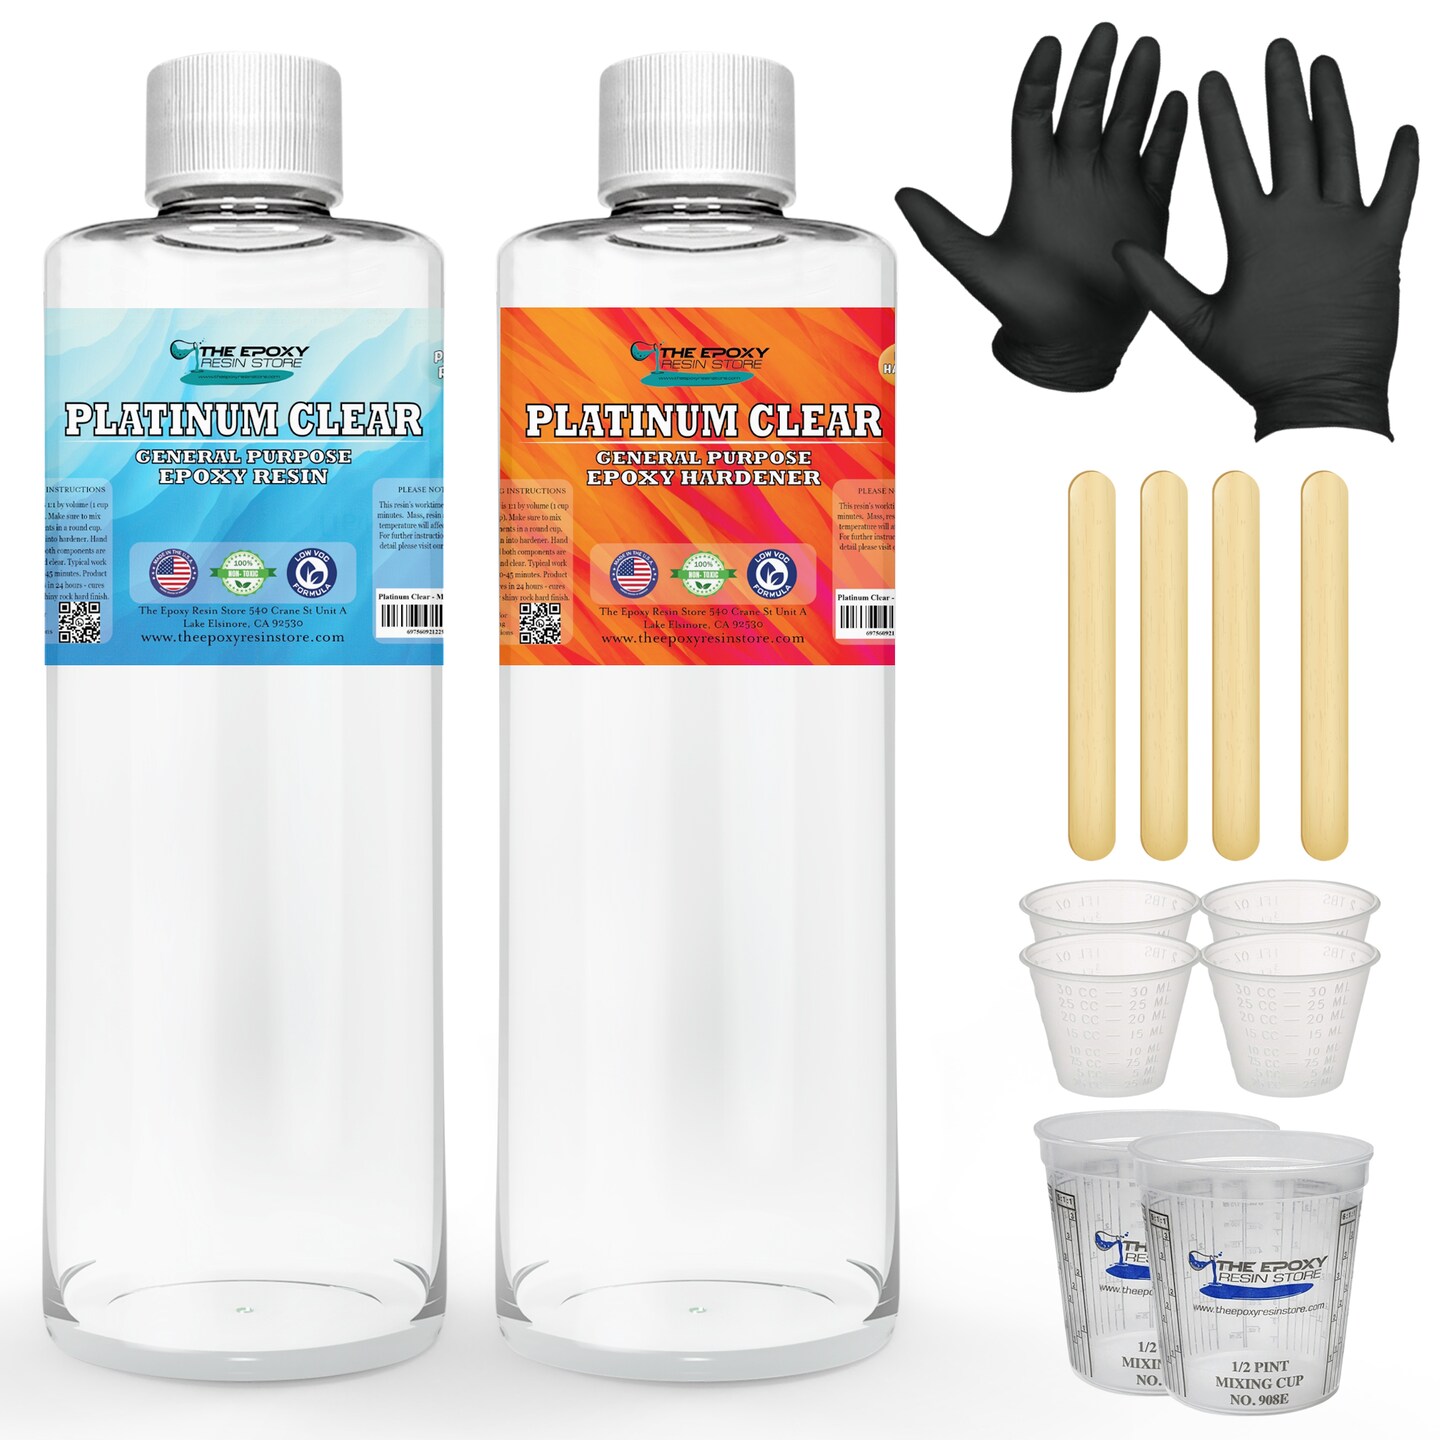 Epoxy Resin Kit Epoxy Resin Molds Silicone Kit Bundle Pixiss Easy Mix 1:1  17-Ounce Kit Epoxy Resin Mixing Cups and Supplies for Tumblers, Jewelry  Resin, Molds, Crafting Resin Kit 